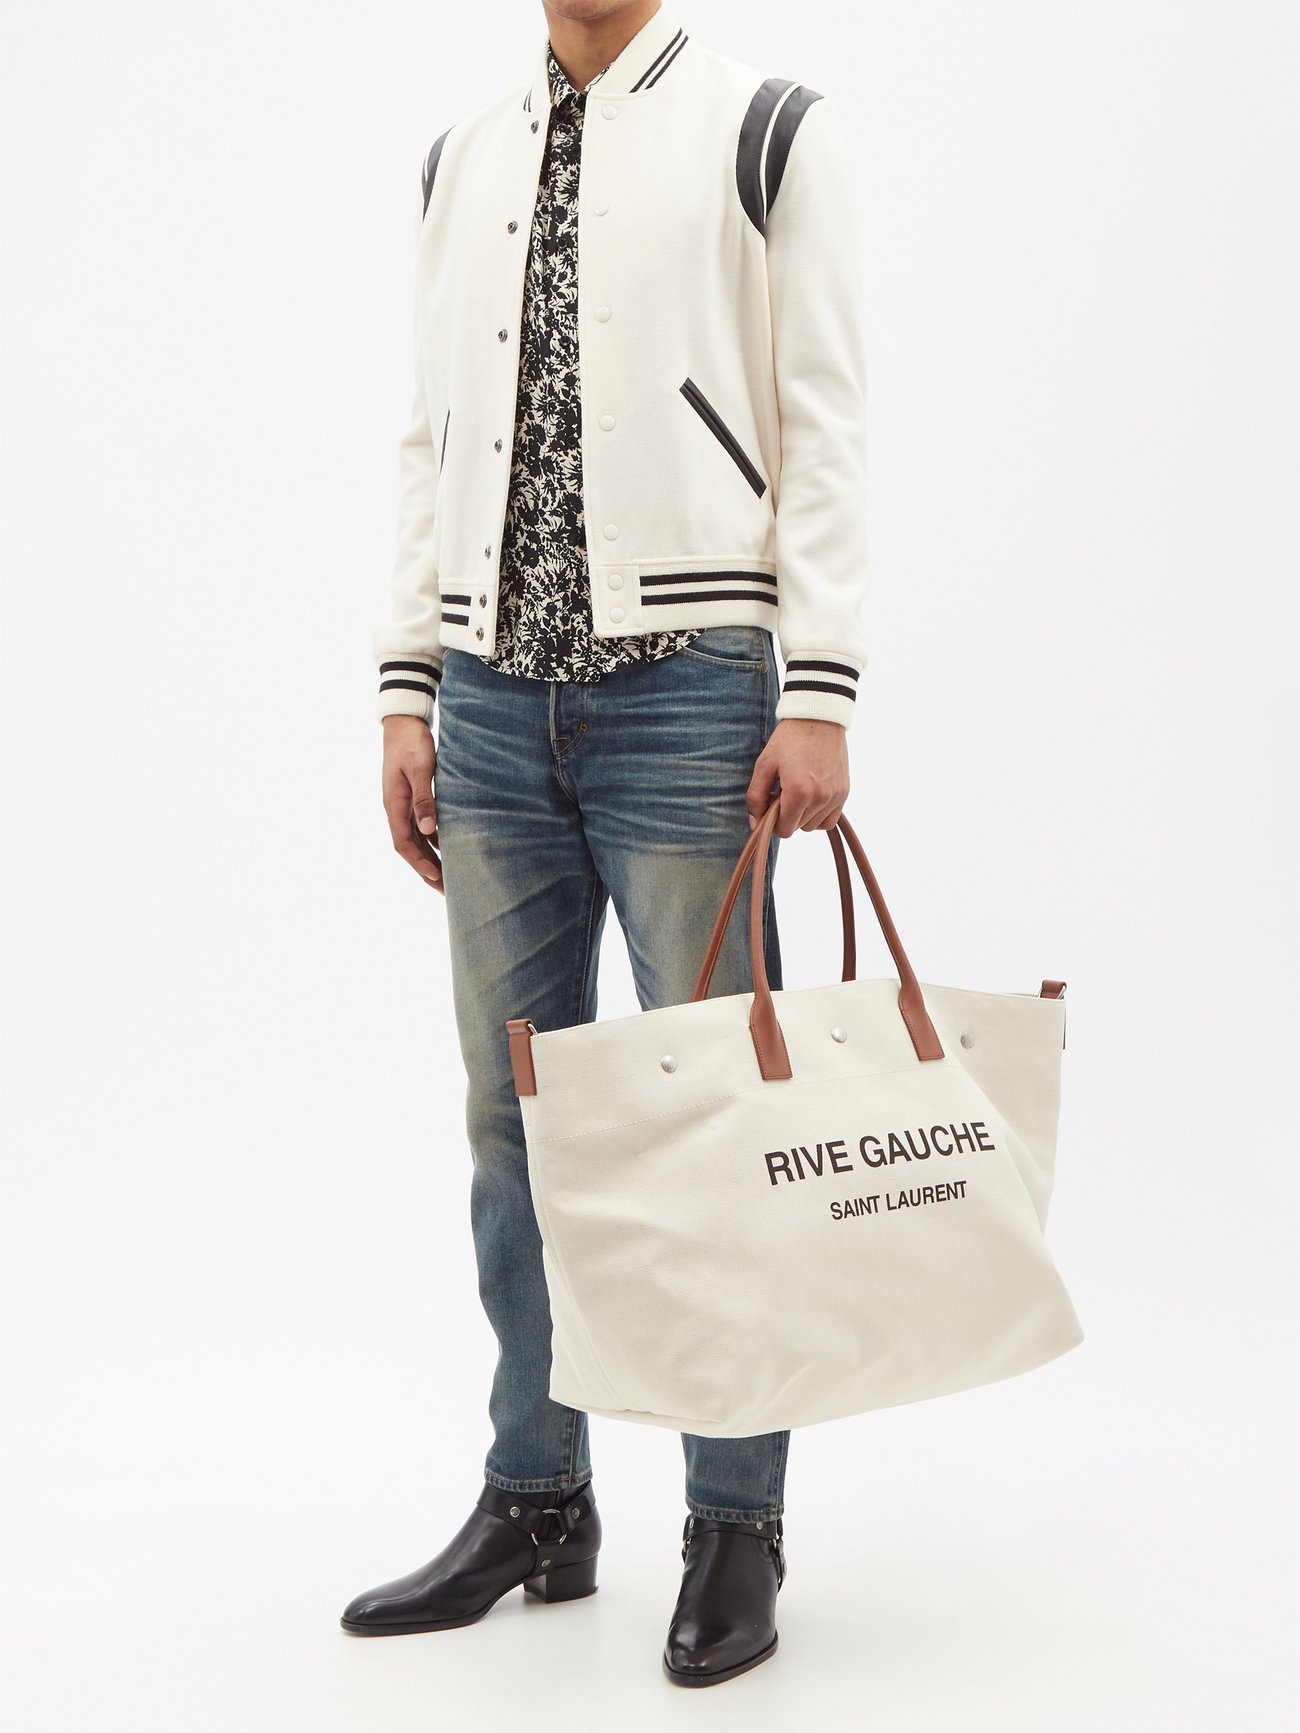 RIVE GAUCHE large tote bag in printed canvas and leather, Saint Laurent